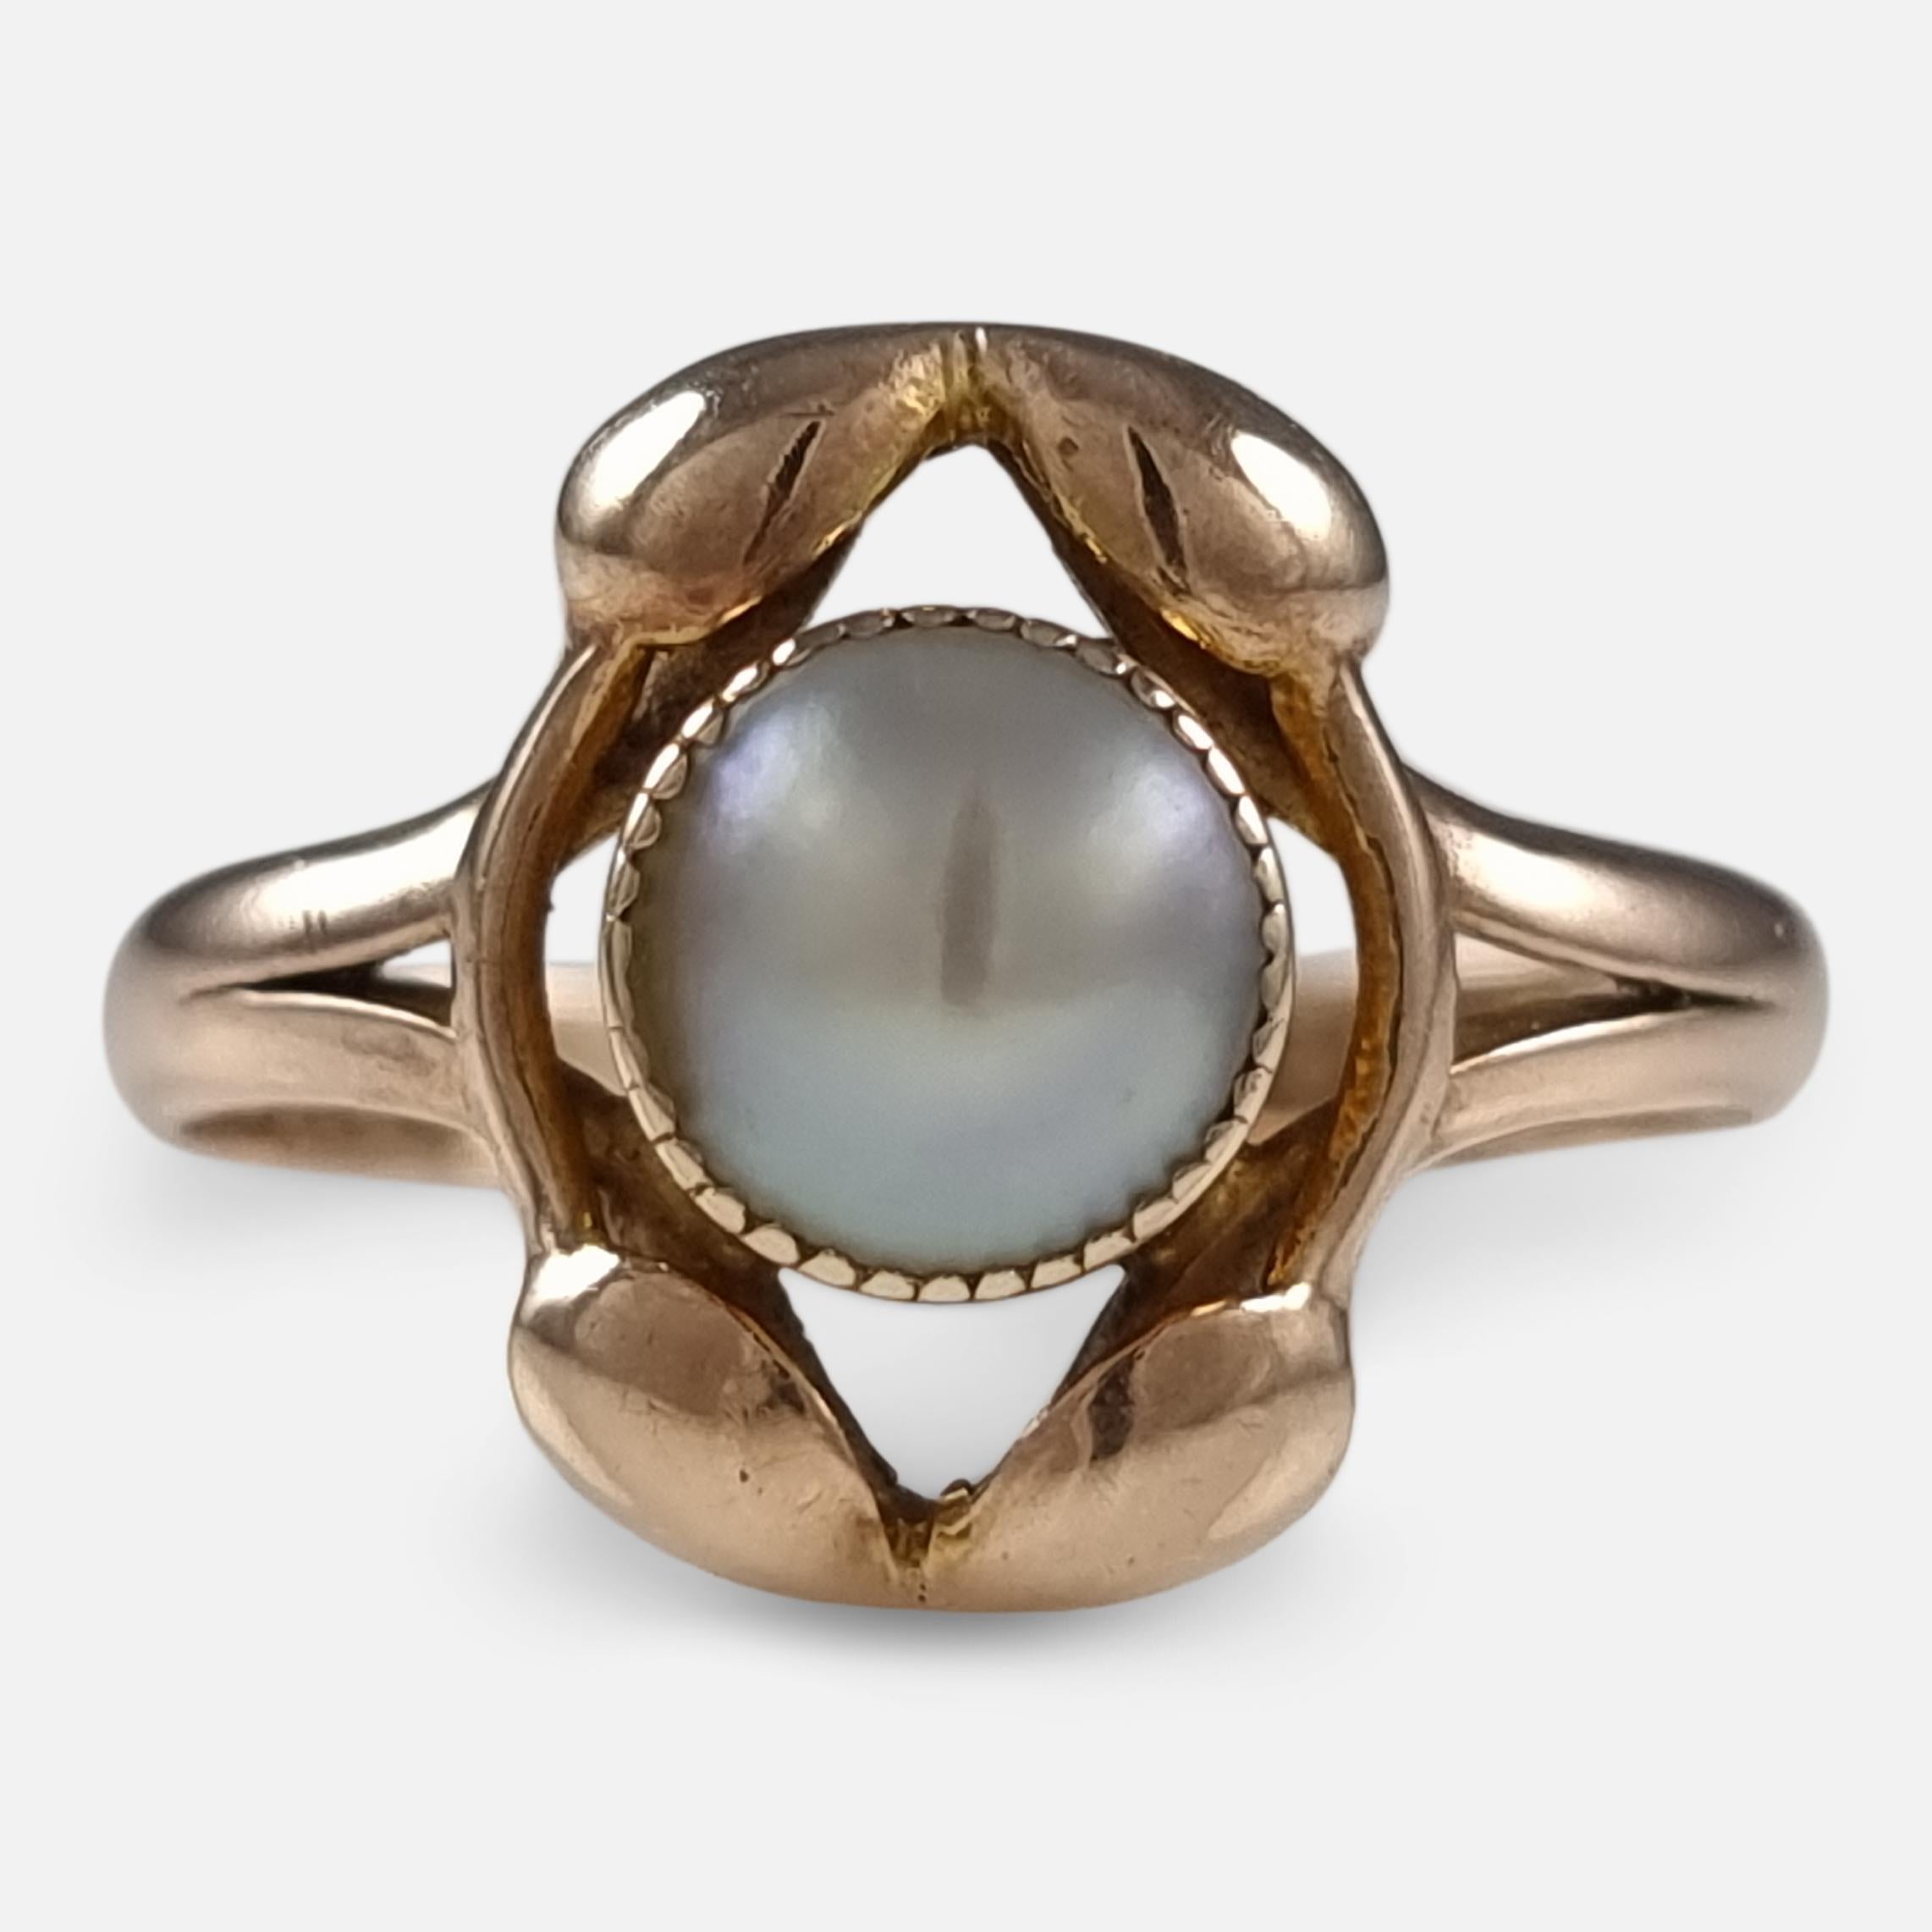 An Art Nouveau 9ct mellow rose gold pearl ring. The ring is set with a central mabe pearl, within an open-work surround of vine tendrils in the Art Nouveau style.

The ring is hallmarked with Chester assay marks, 1911; '9.375' to denote 9 carat